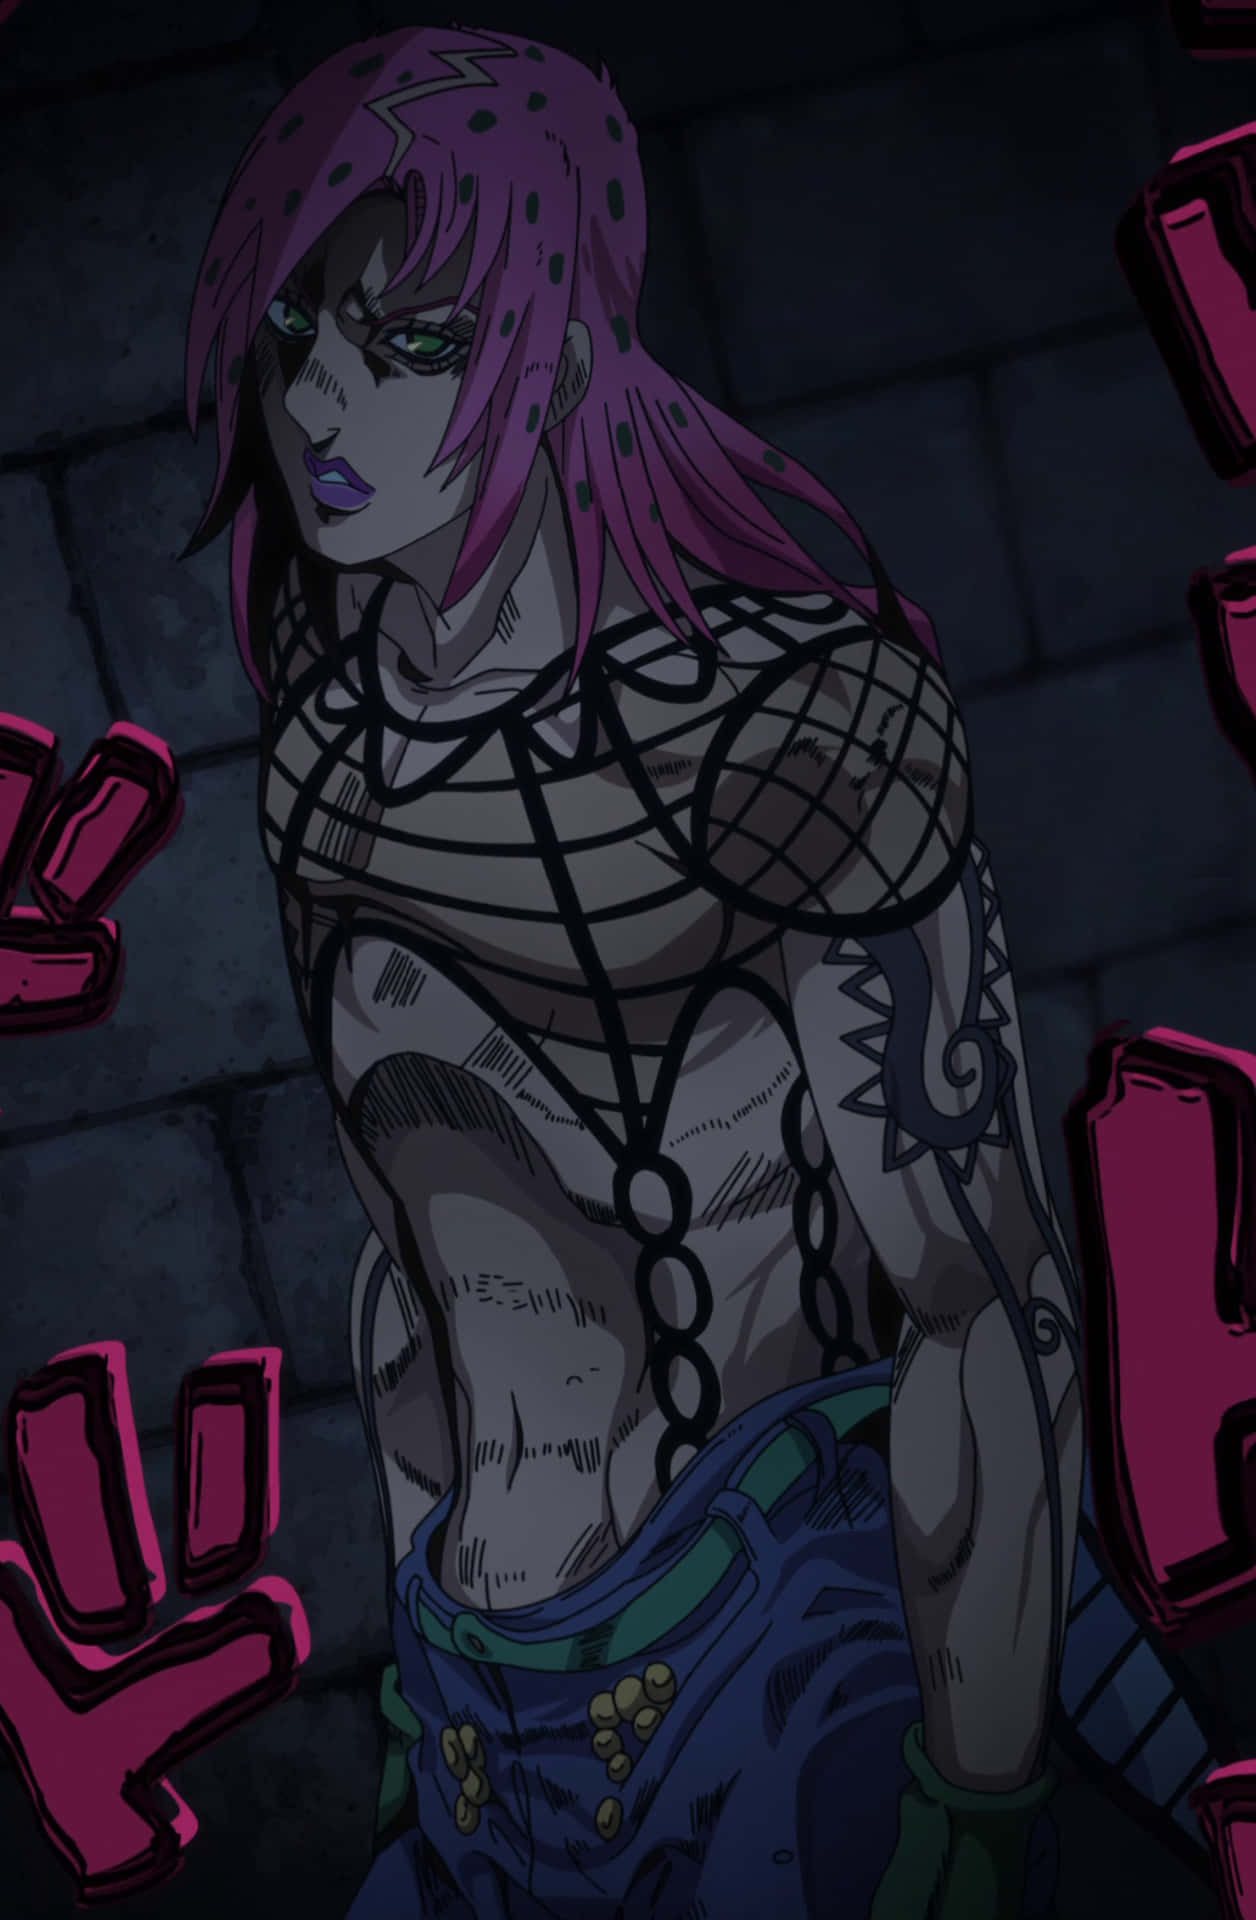 "The ever- scheming and cunning Diavolo, leader of the powerful mafia Passione." Wallpaper